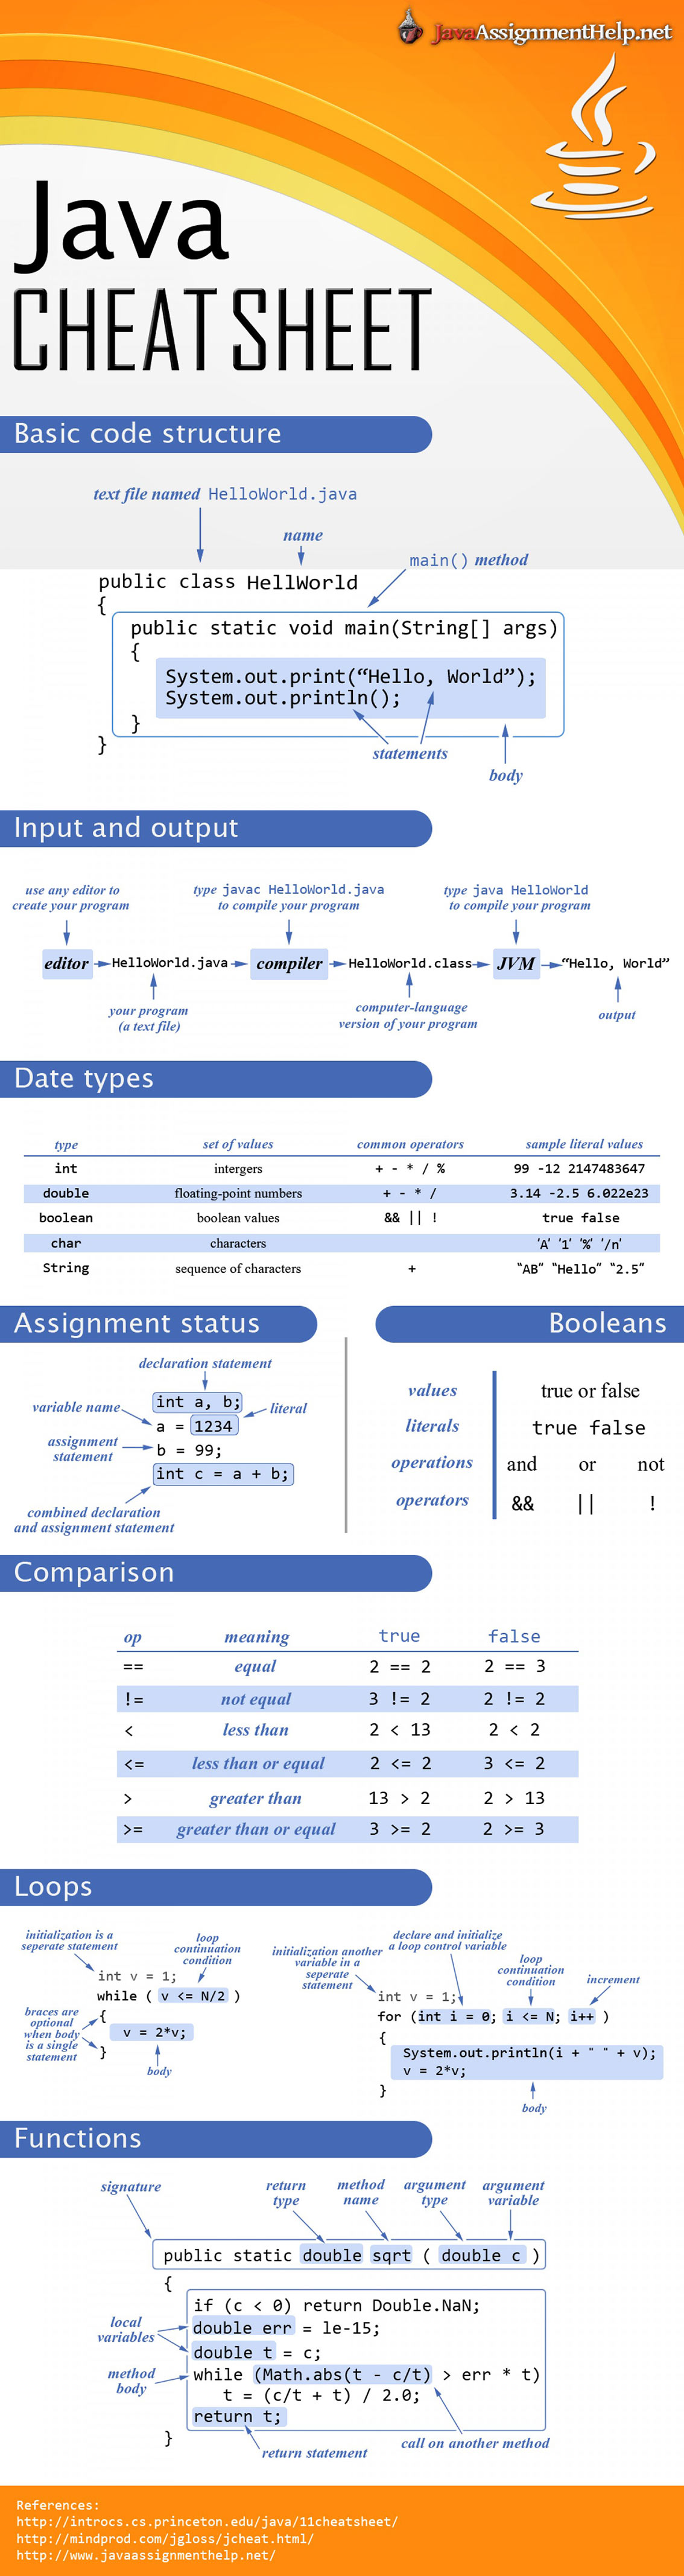 Java Cheat Sheet For Programmers Infographic